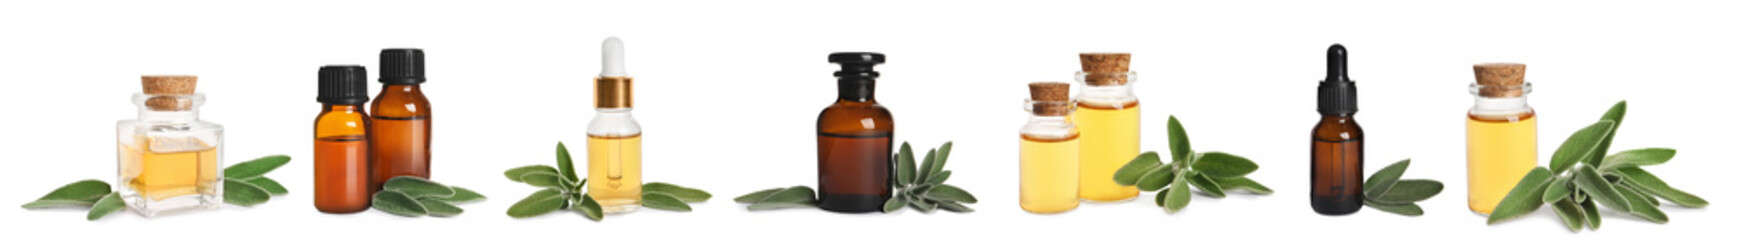 Set with bottles of essential sage oil and leaves on white background